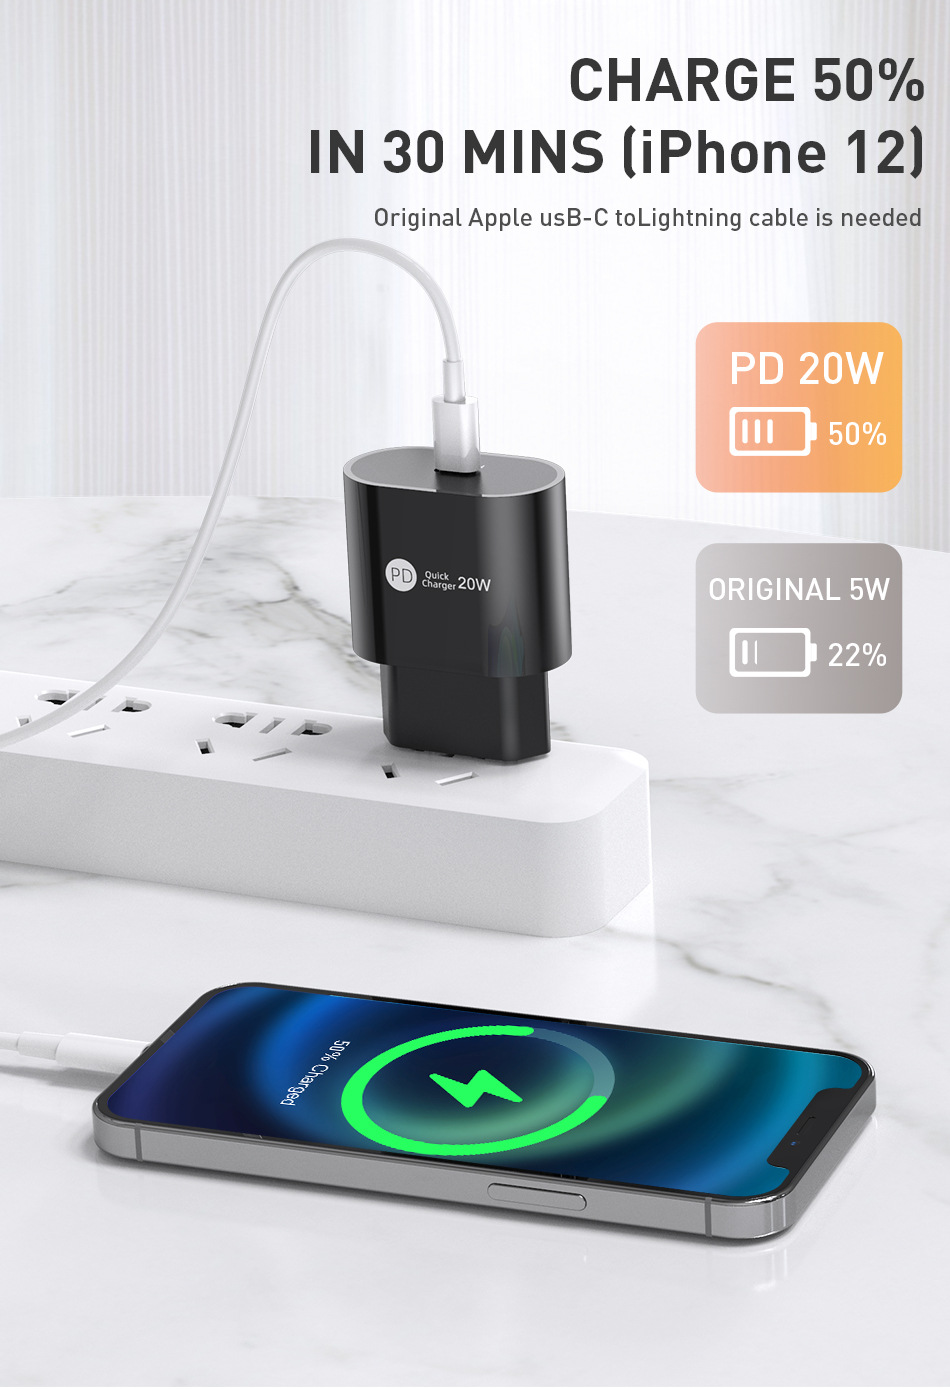 USLION-PD-20W-QC4030-USB-C-Charger-Travel-Charger-Adapter-Fast-Charging-For-iPhone-12-Pro-Max-Mini-O-1798244-5